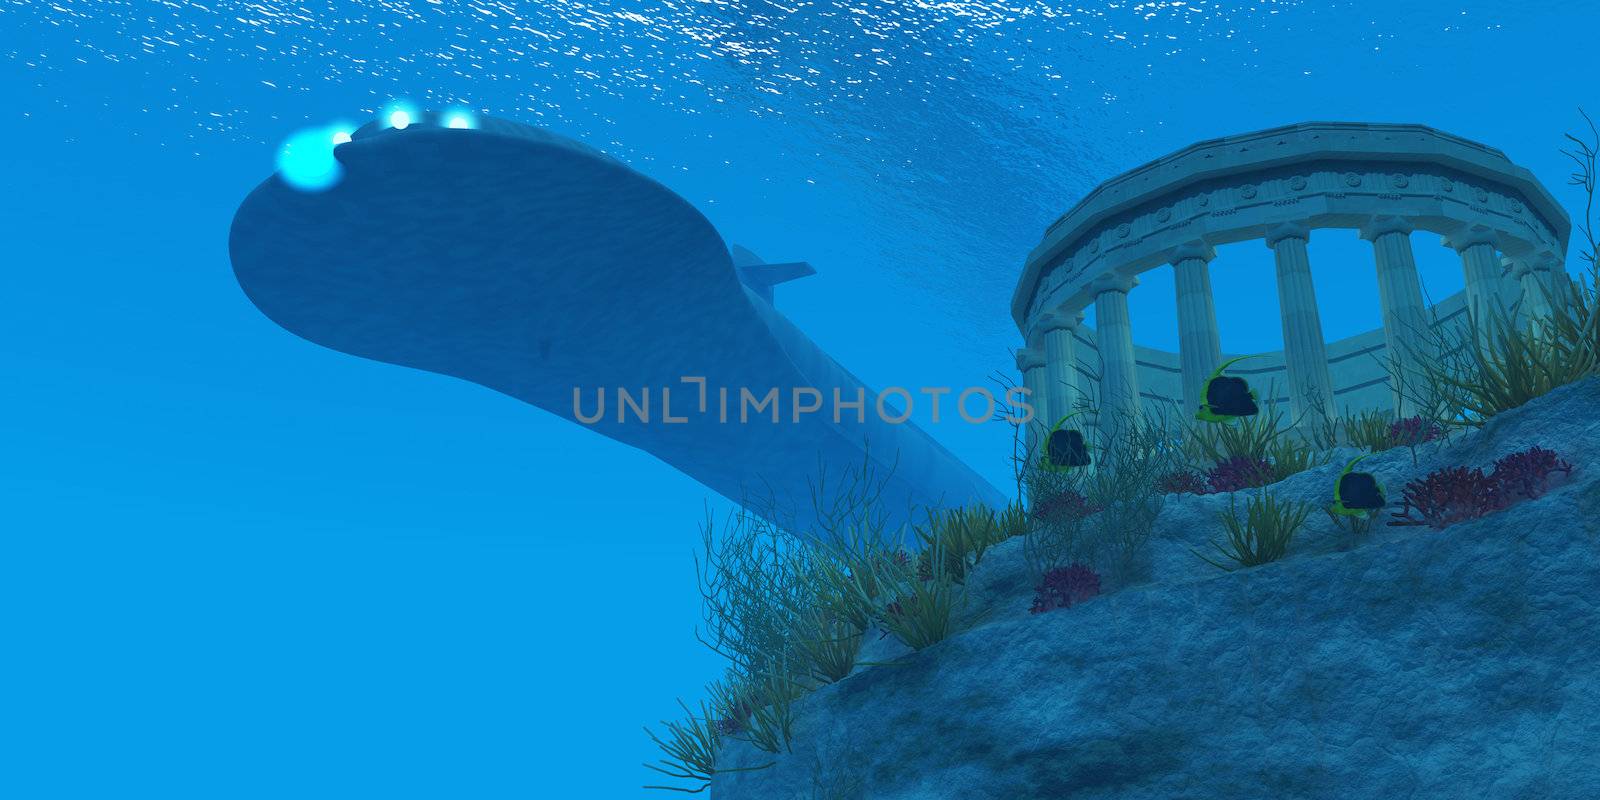 A submarine passes over a Greek temple ruin near a reef with sea life.